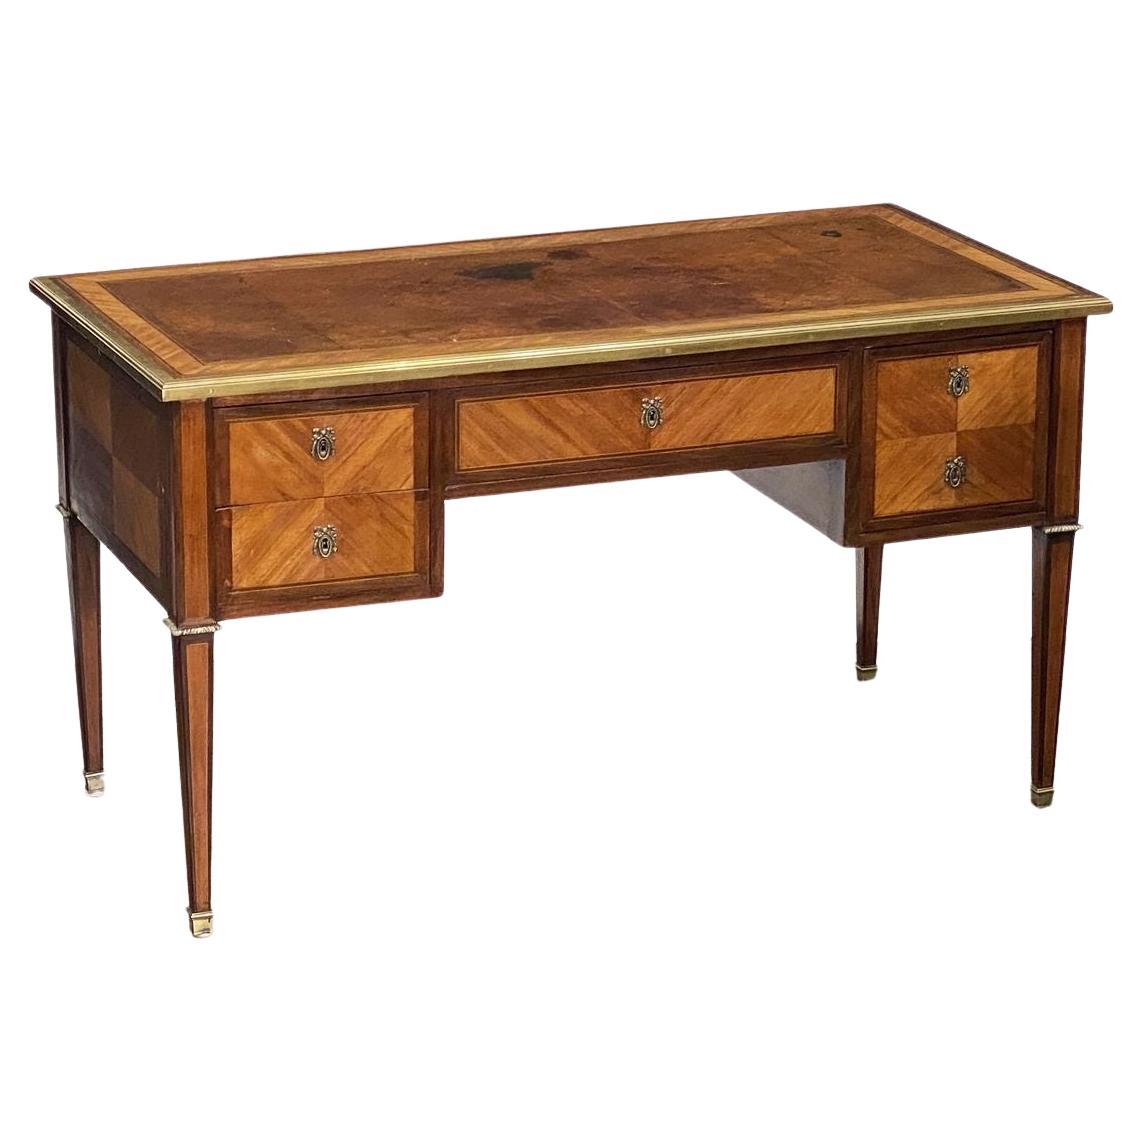 French Directoire Period Writing Desk of Walnut and Mahogany with Leather Top